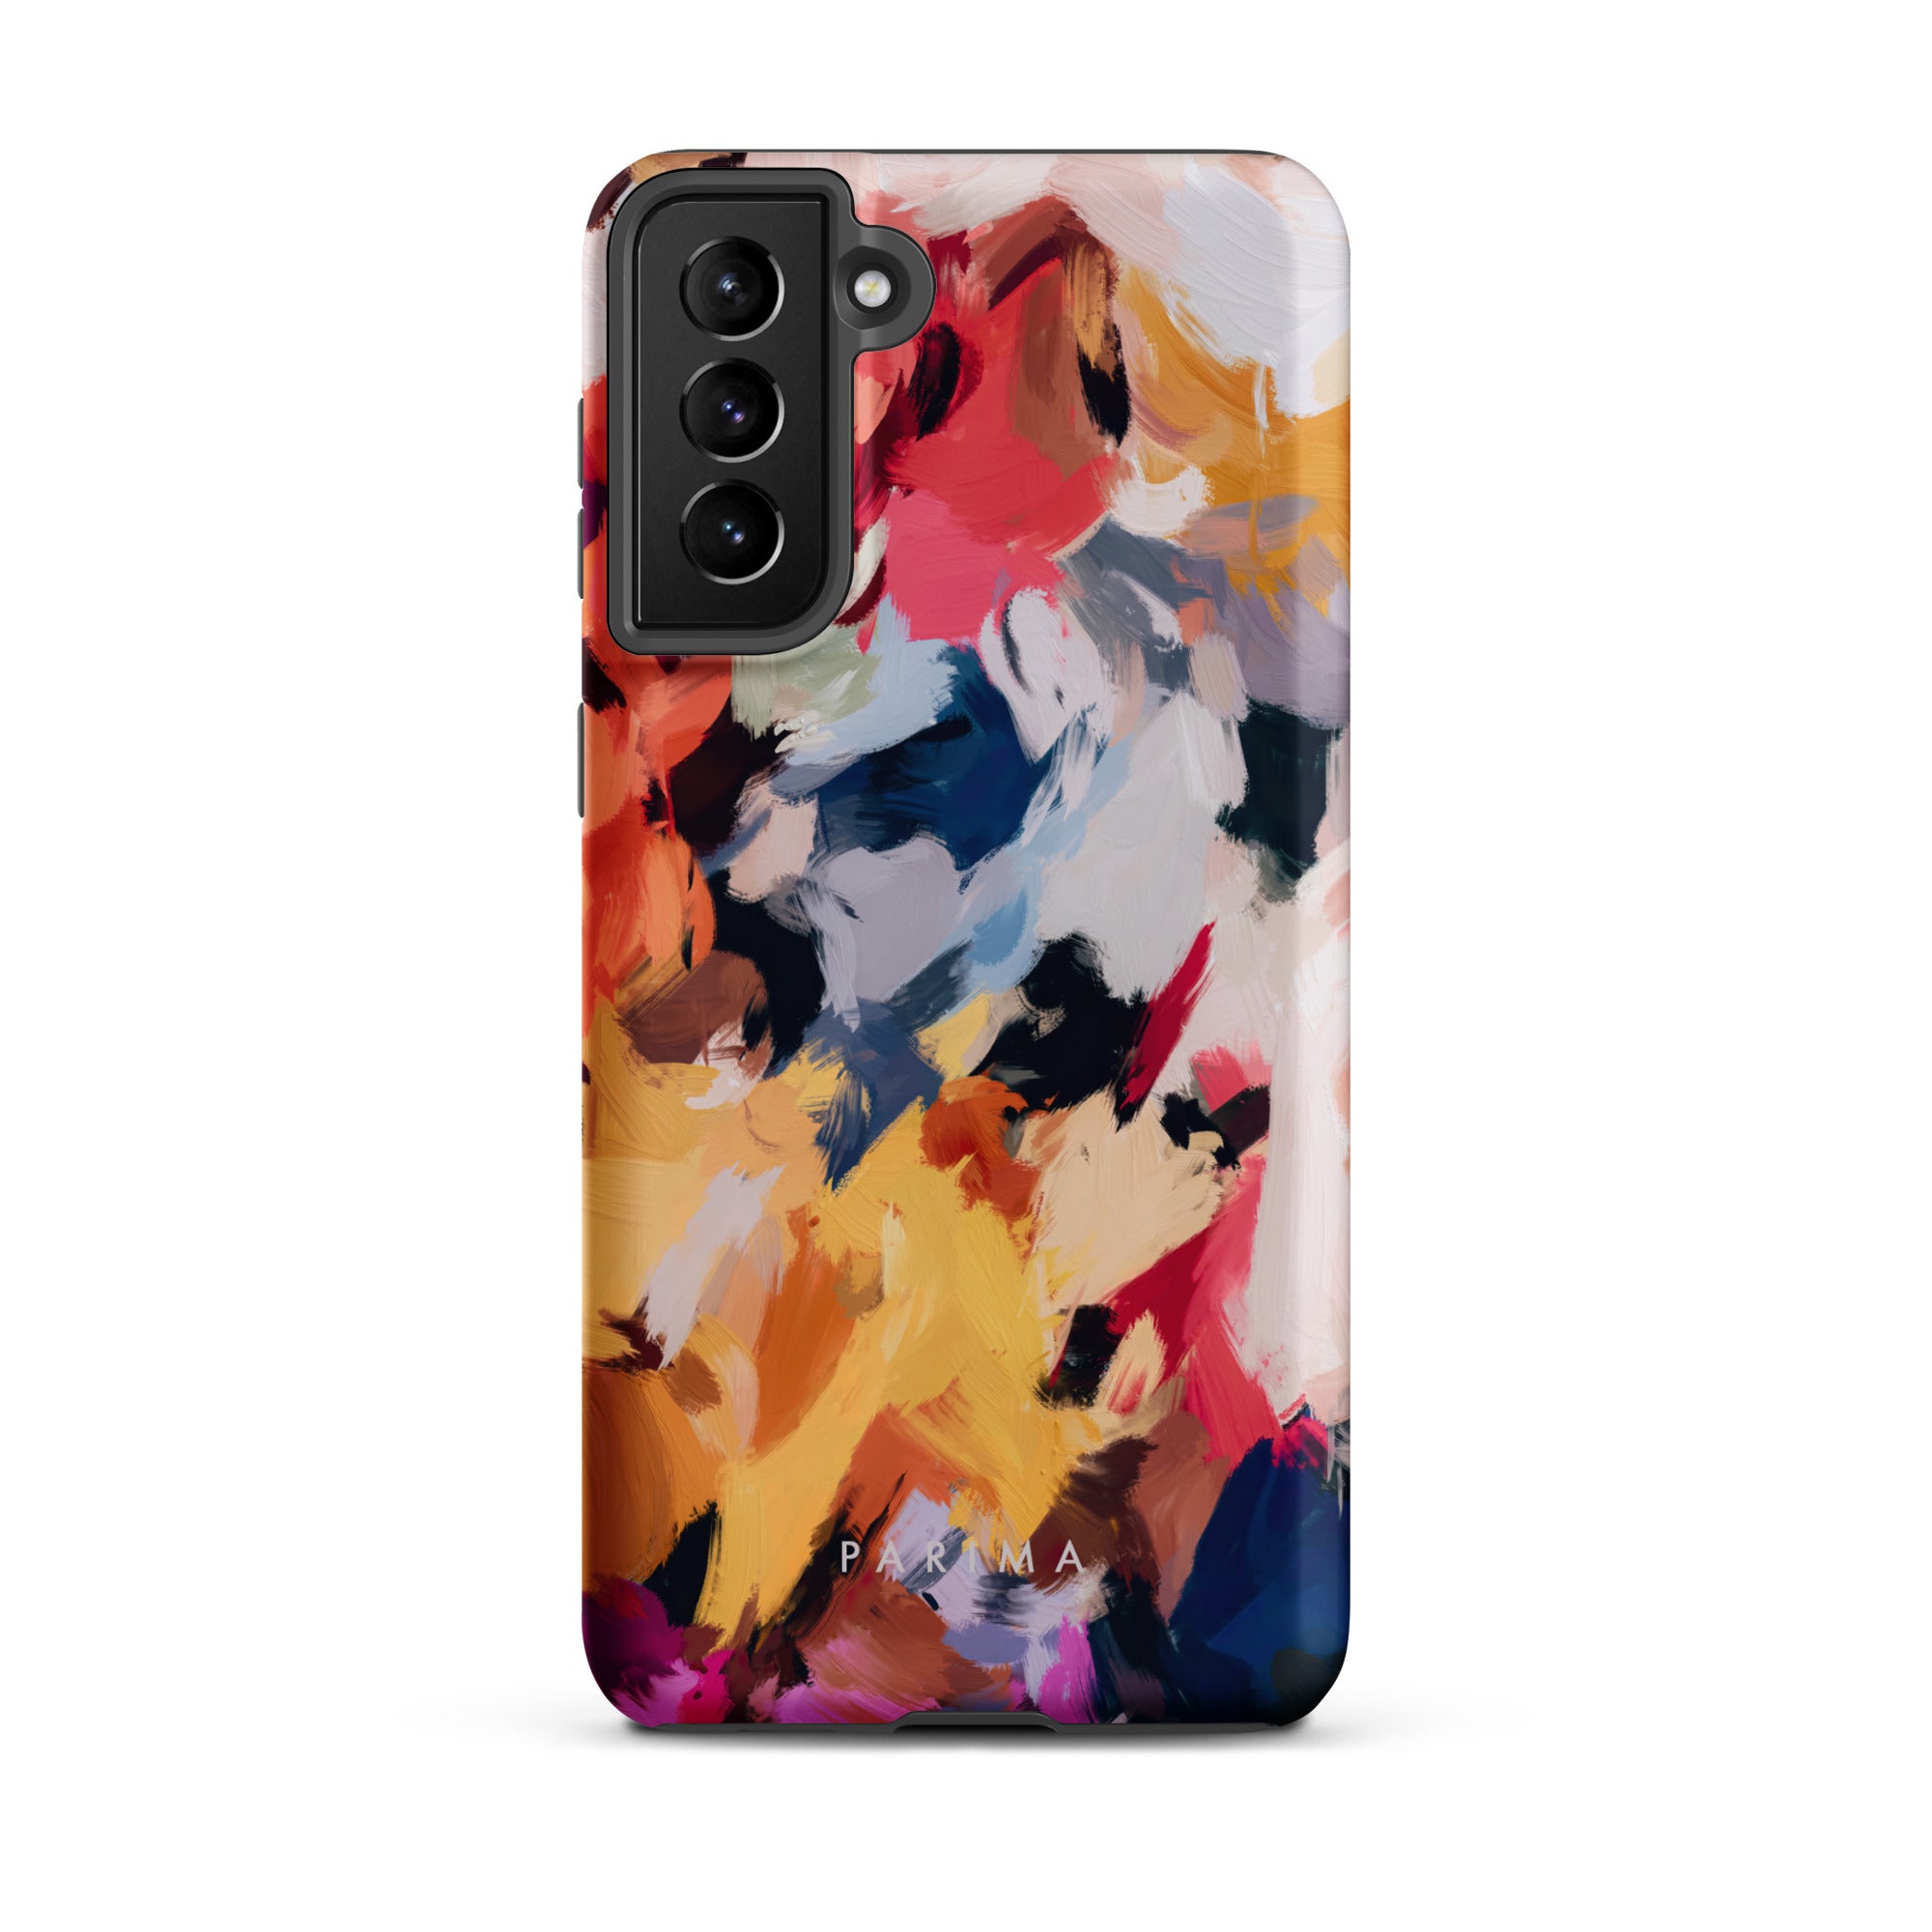 Wilde, blue and yellow multicolor abstract art on Samsung Galaxy S21 Plus tough case by Parima Studio